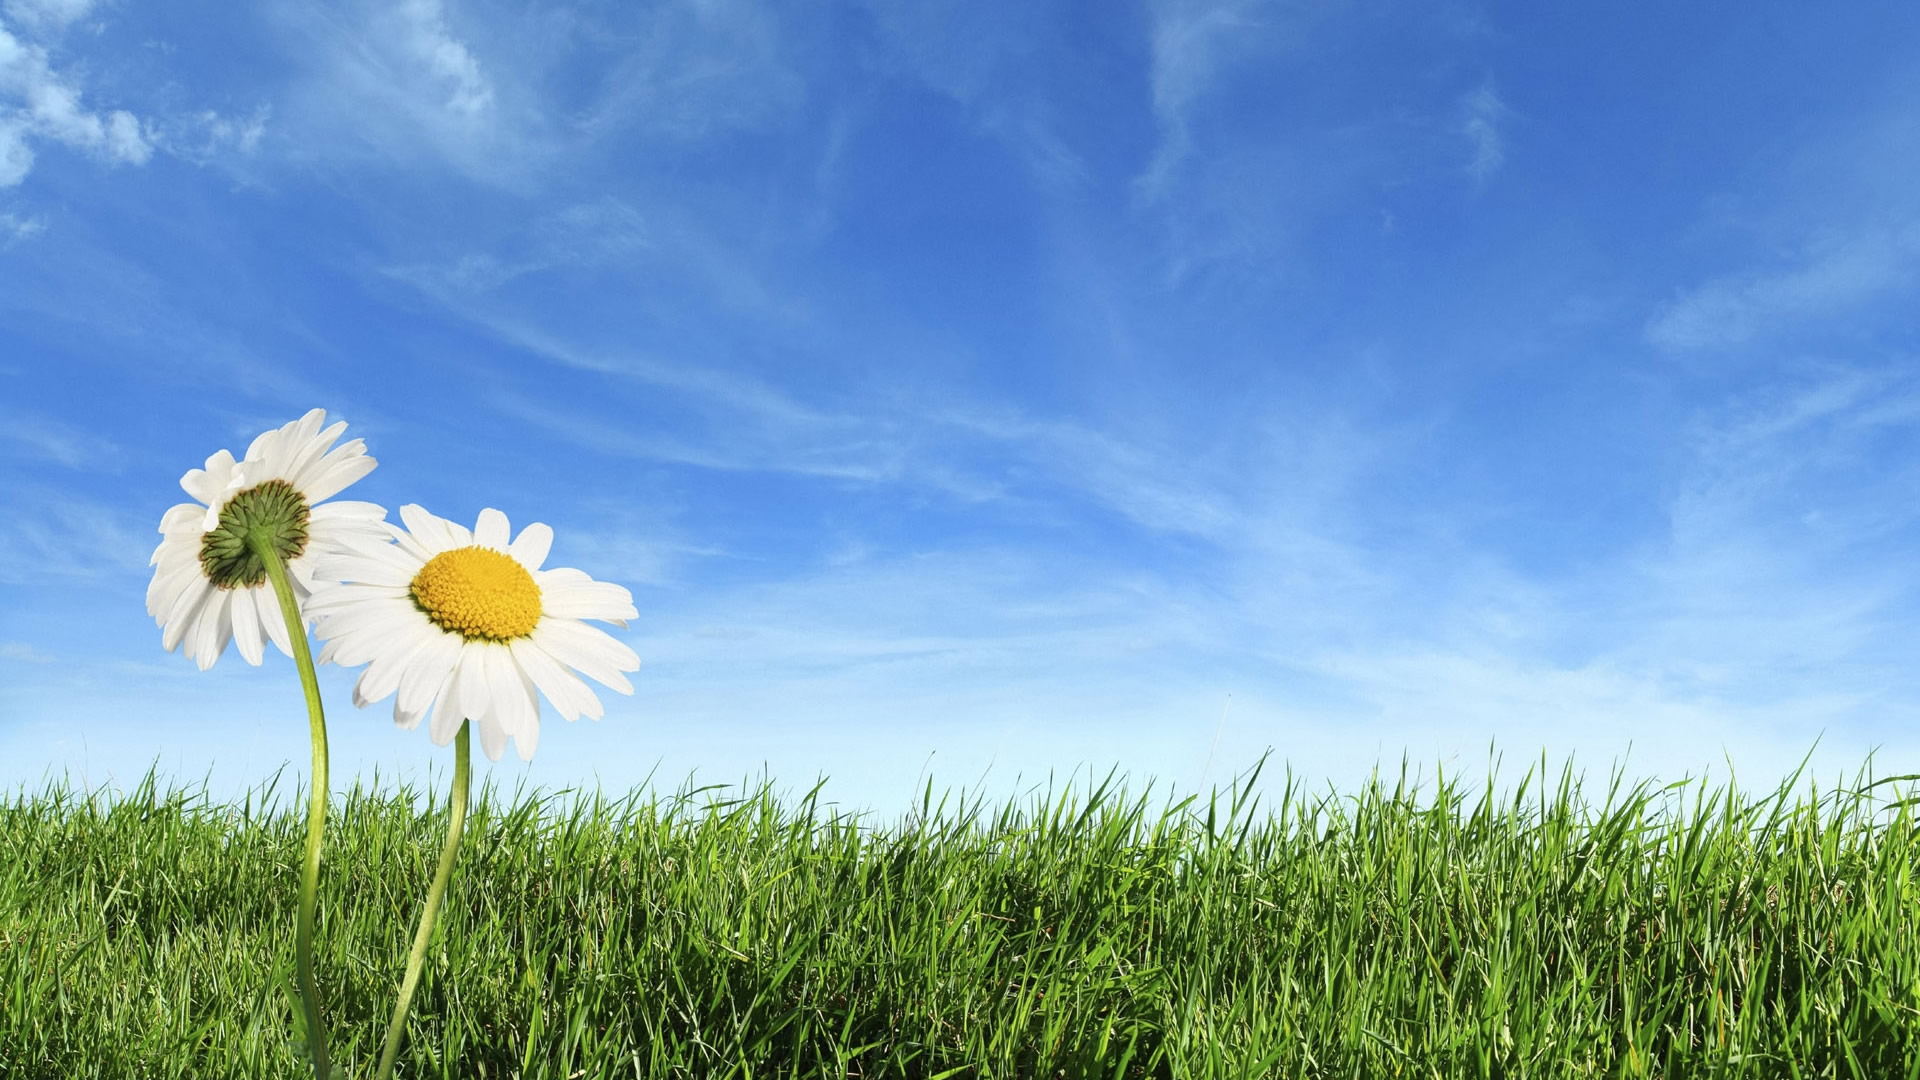 Nature Wallpaper High Resolution Spring Blue Sky And